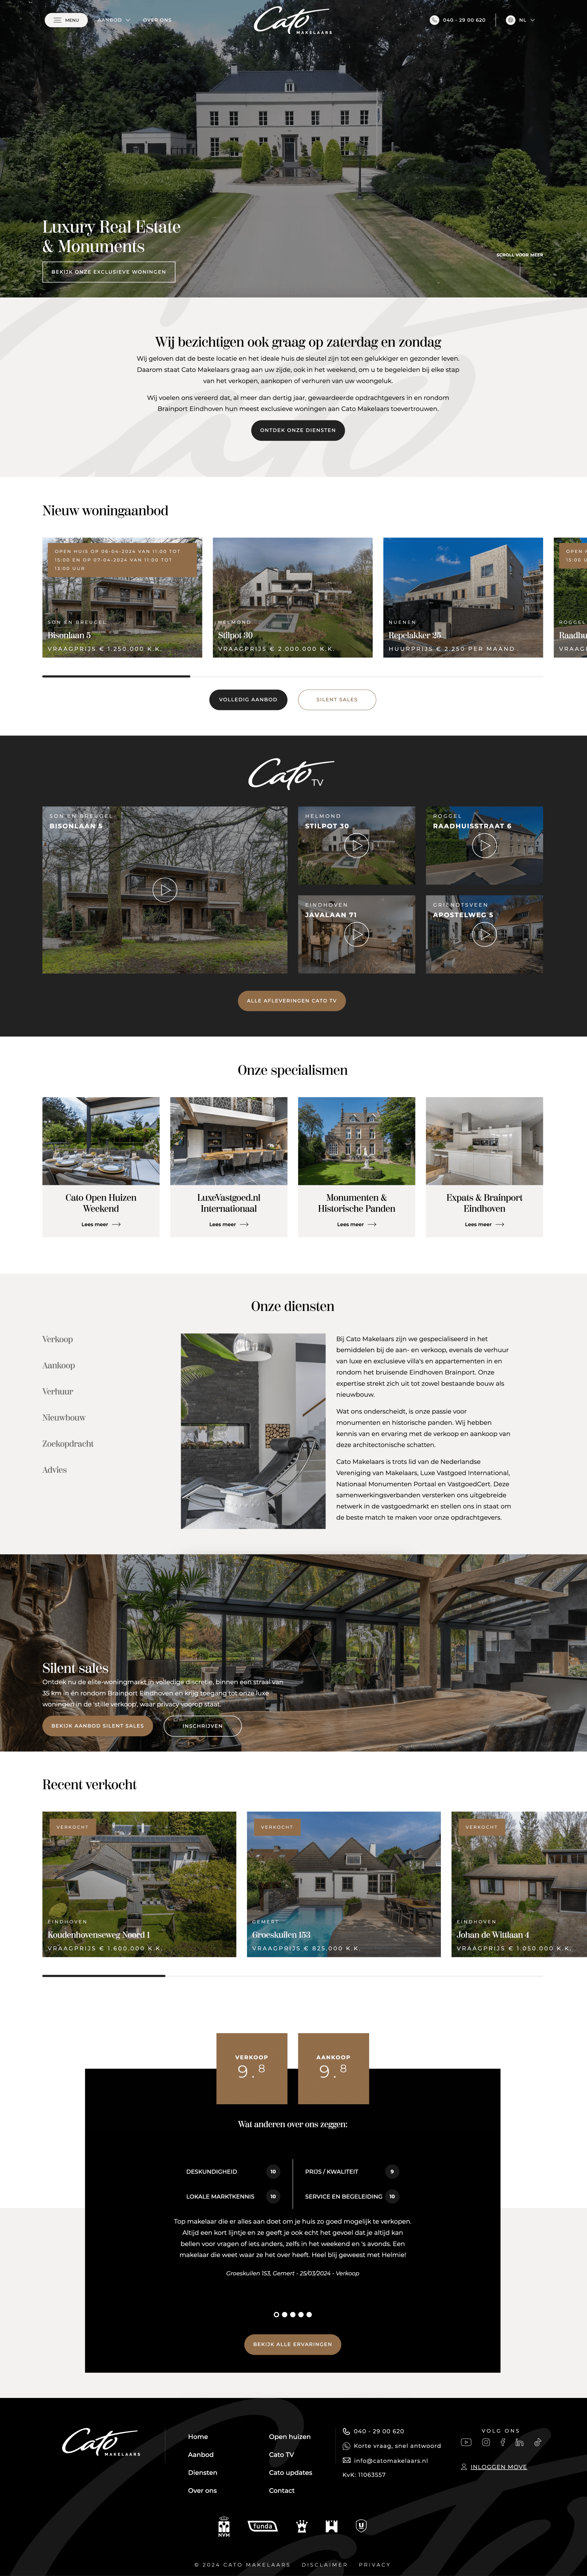 Luxury Real Estate & Monuments website